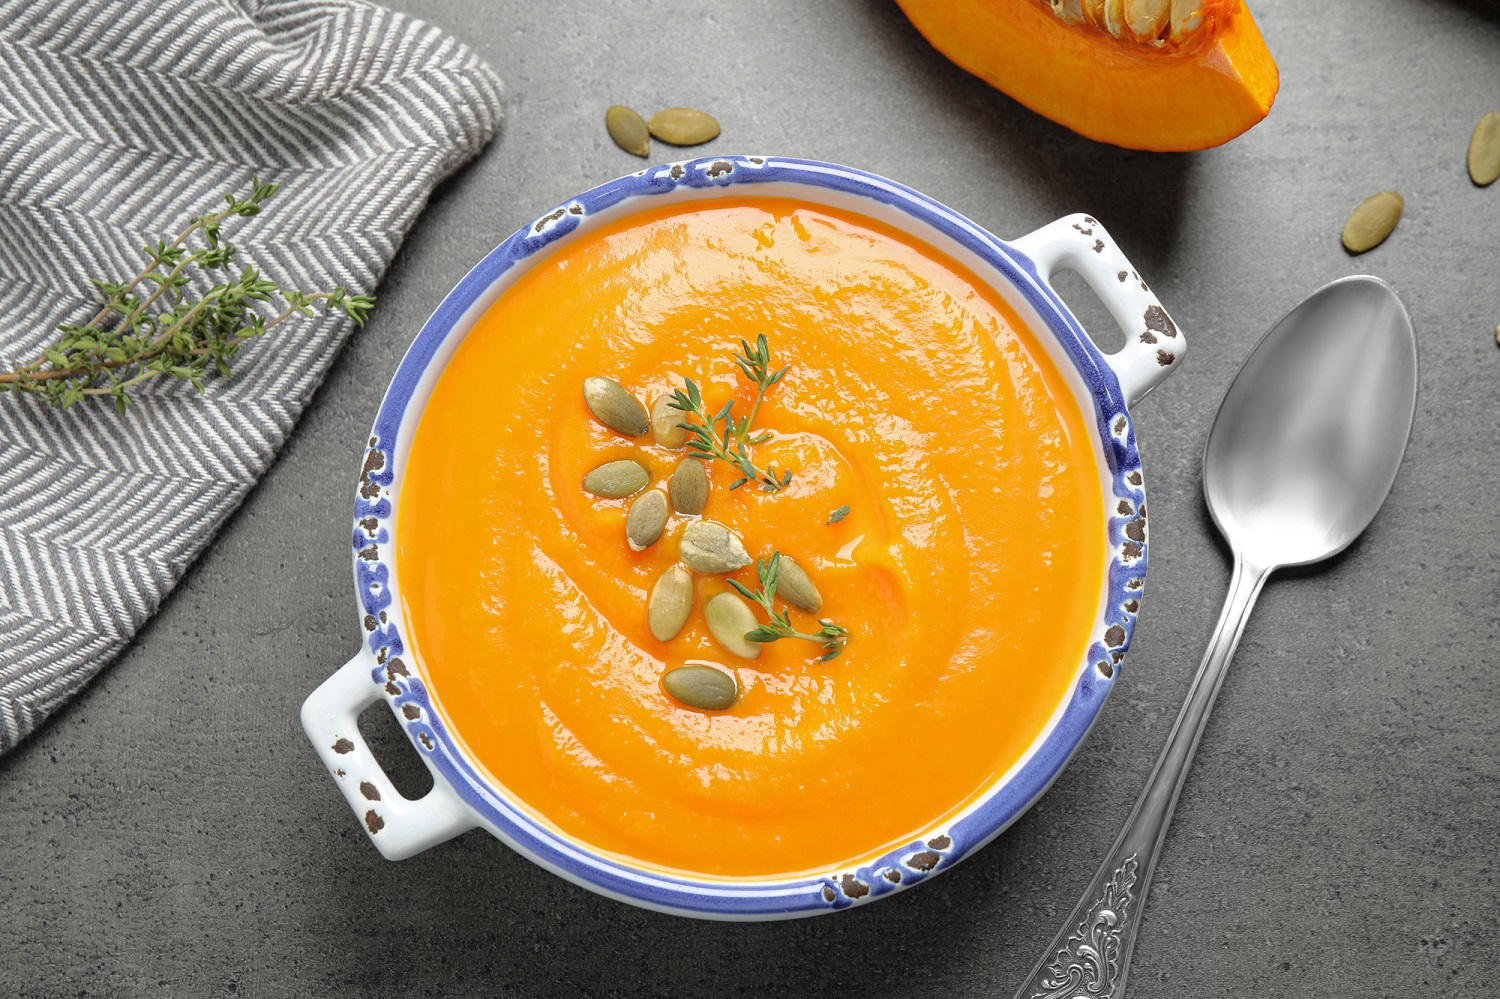 Pumpkin soup topped with pumpkin seeds and herbs in a blue bowl